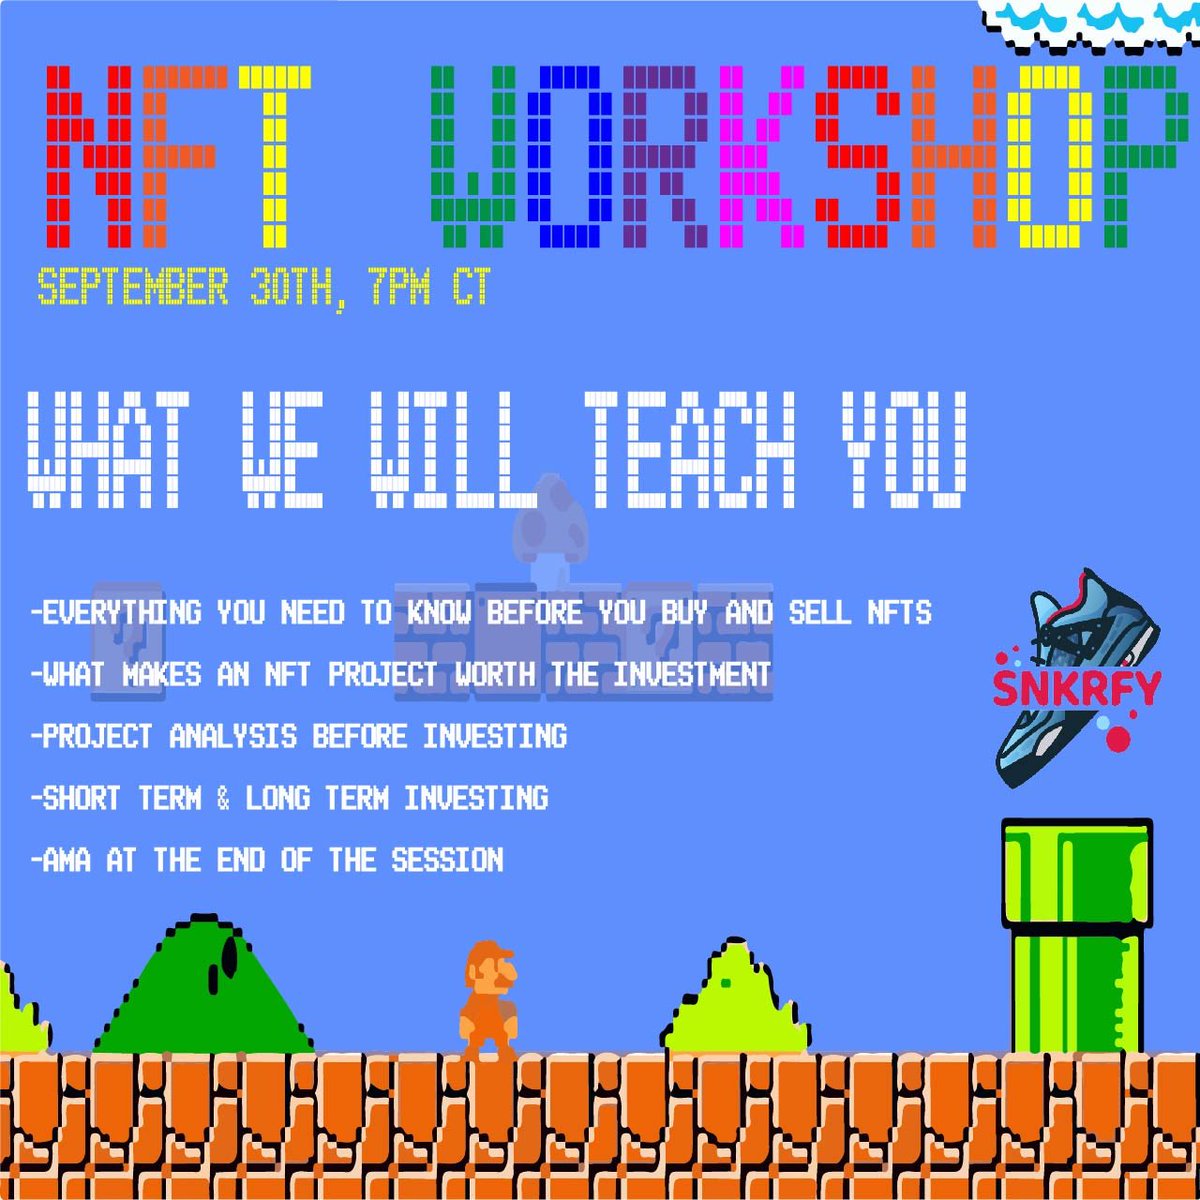 Who wants a free membership before our NFT workshop?